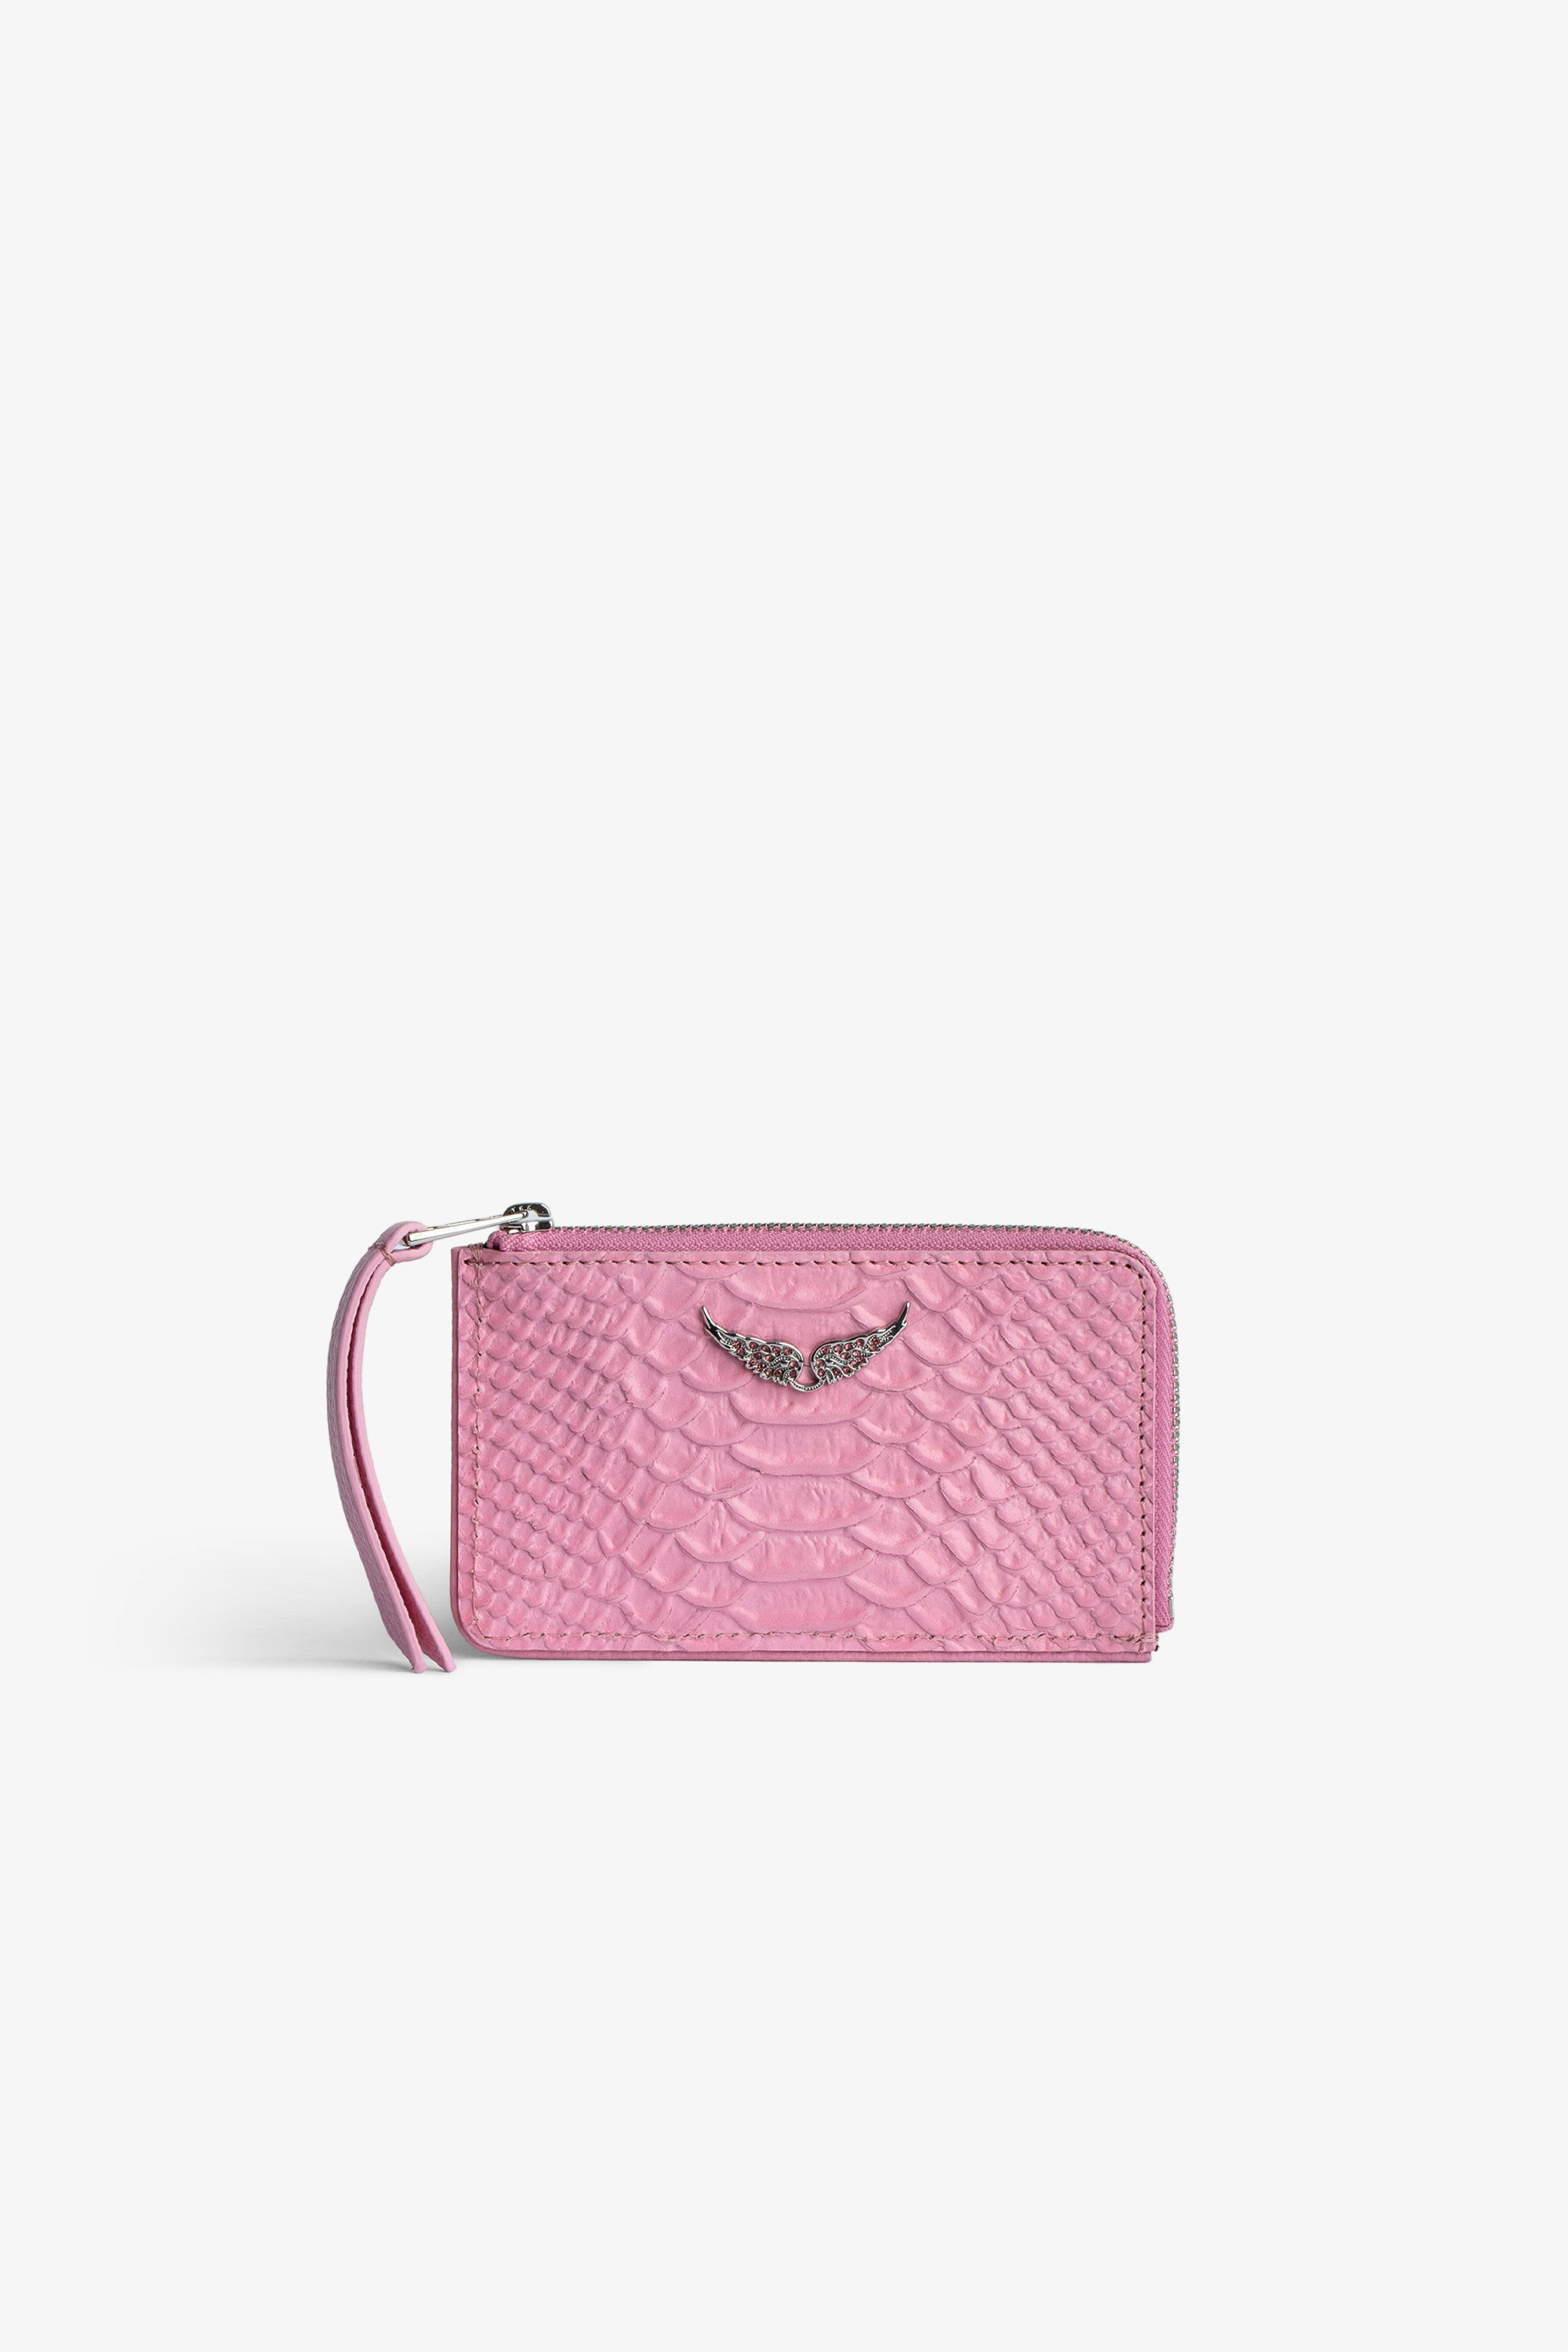 ZV Card Savage Card Holder Women’s card holder in pink python-effect leather